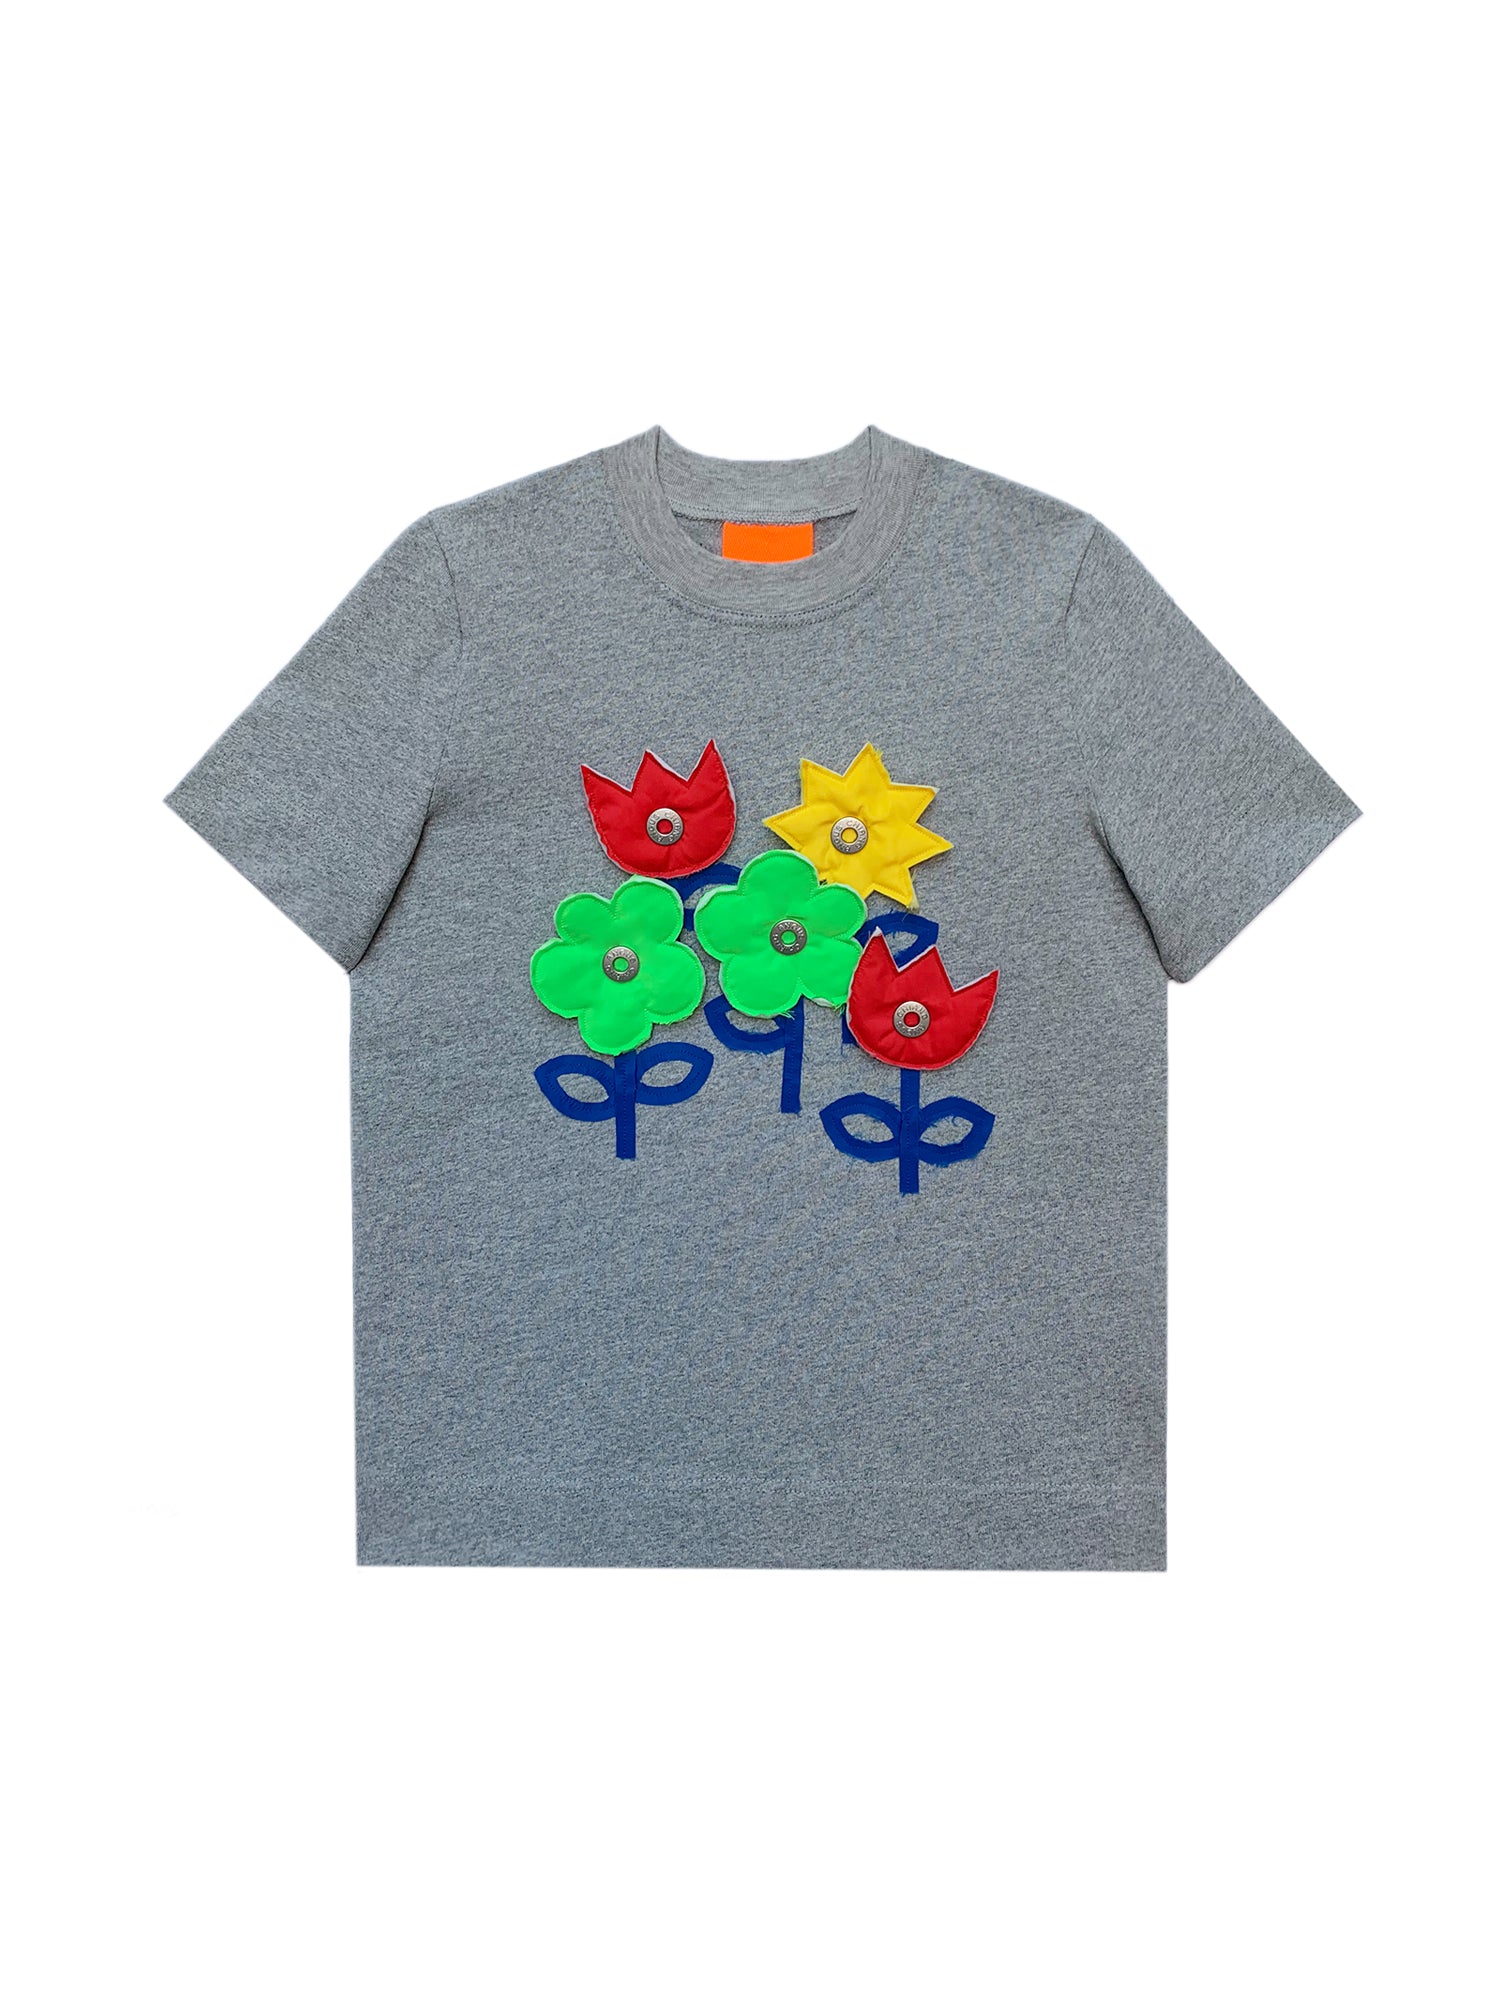 [ HAPPY MOTHER'S DAY ] ALL OF FLOWERS WERE BLOOMING T-SHIRT